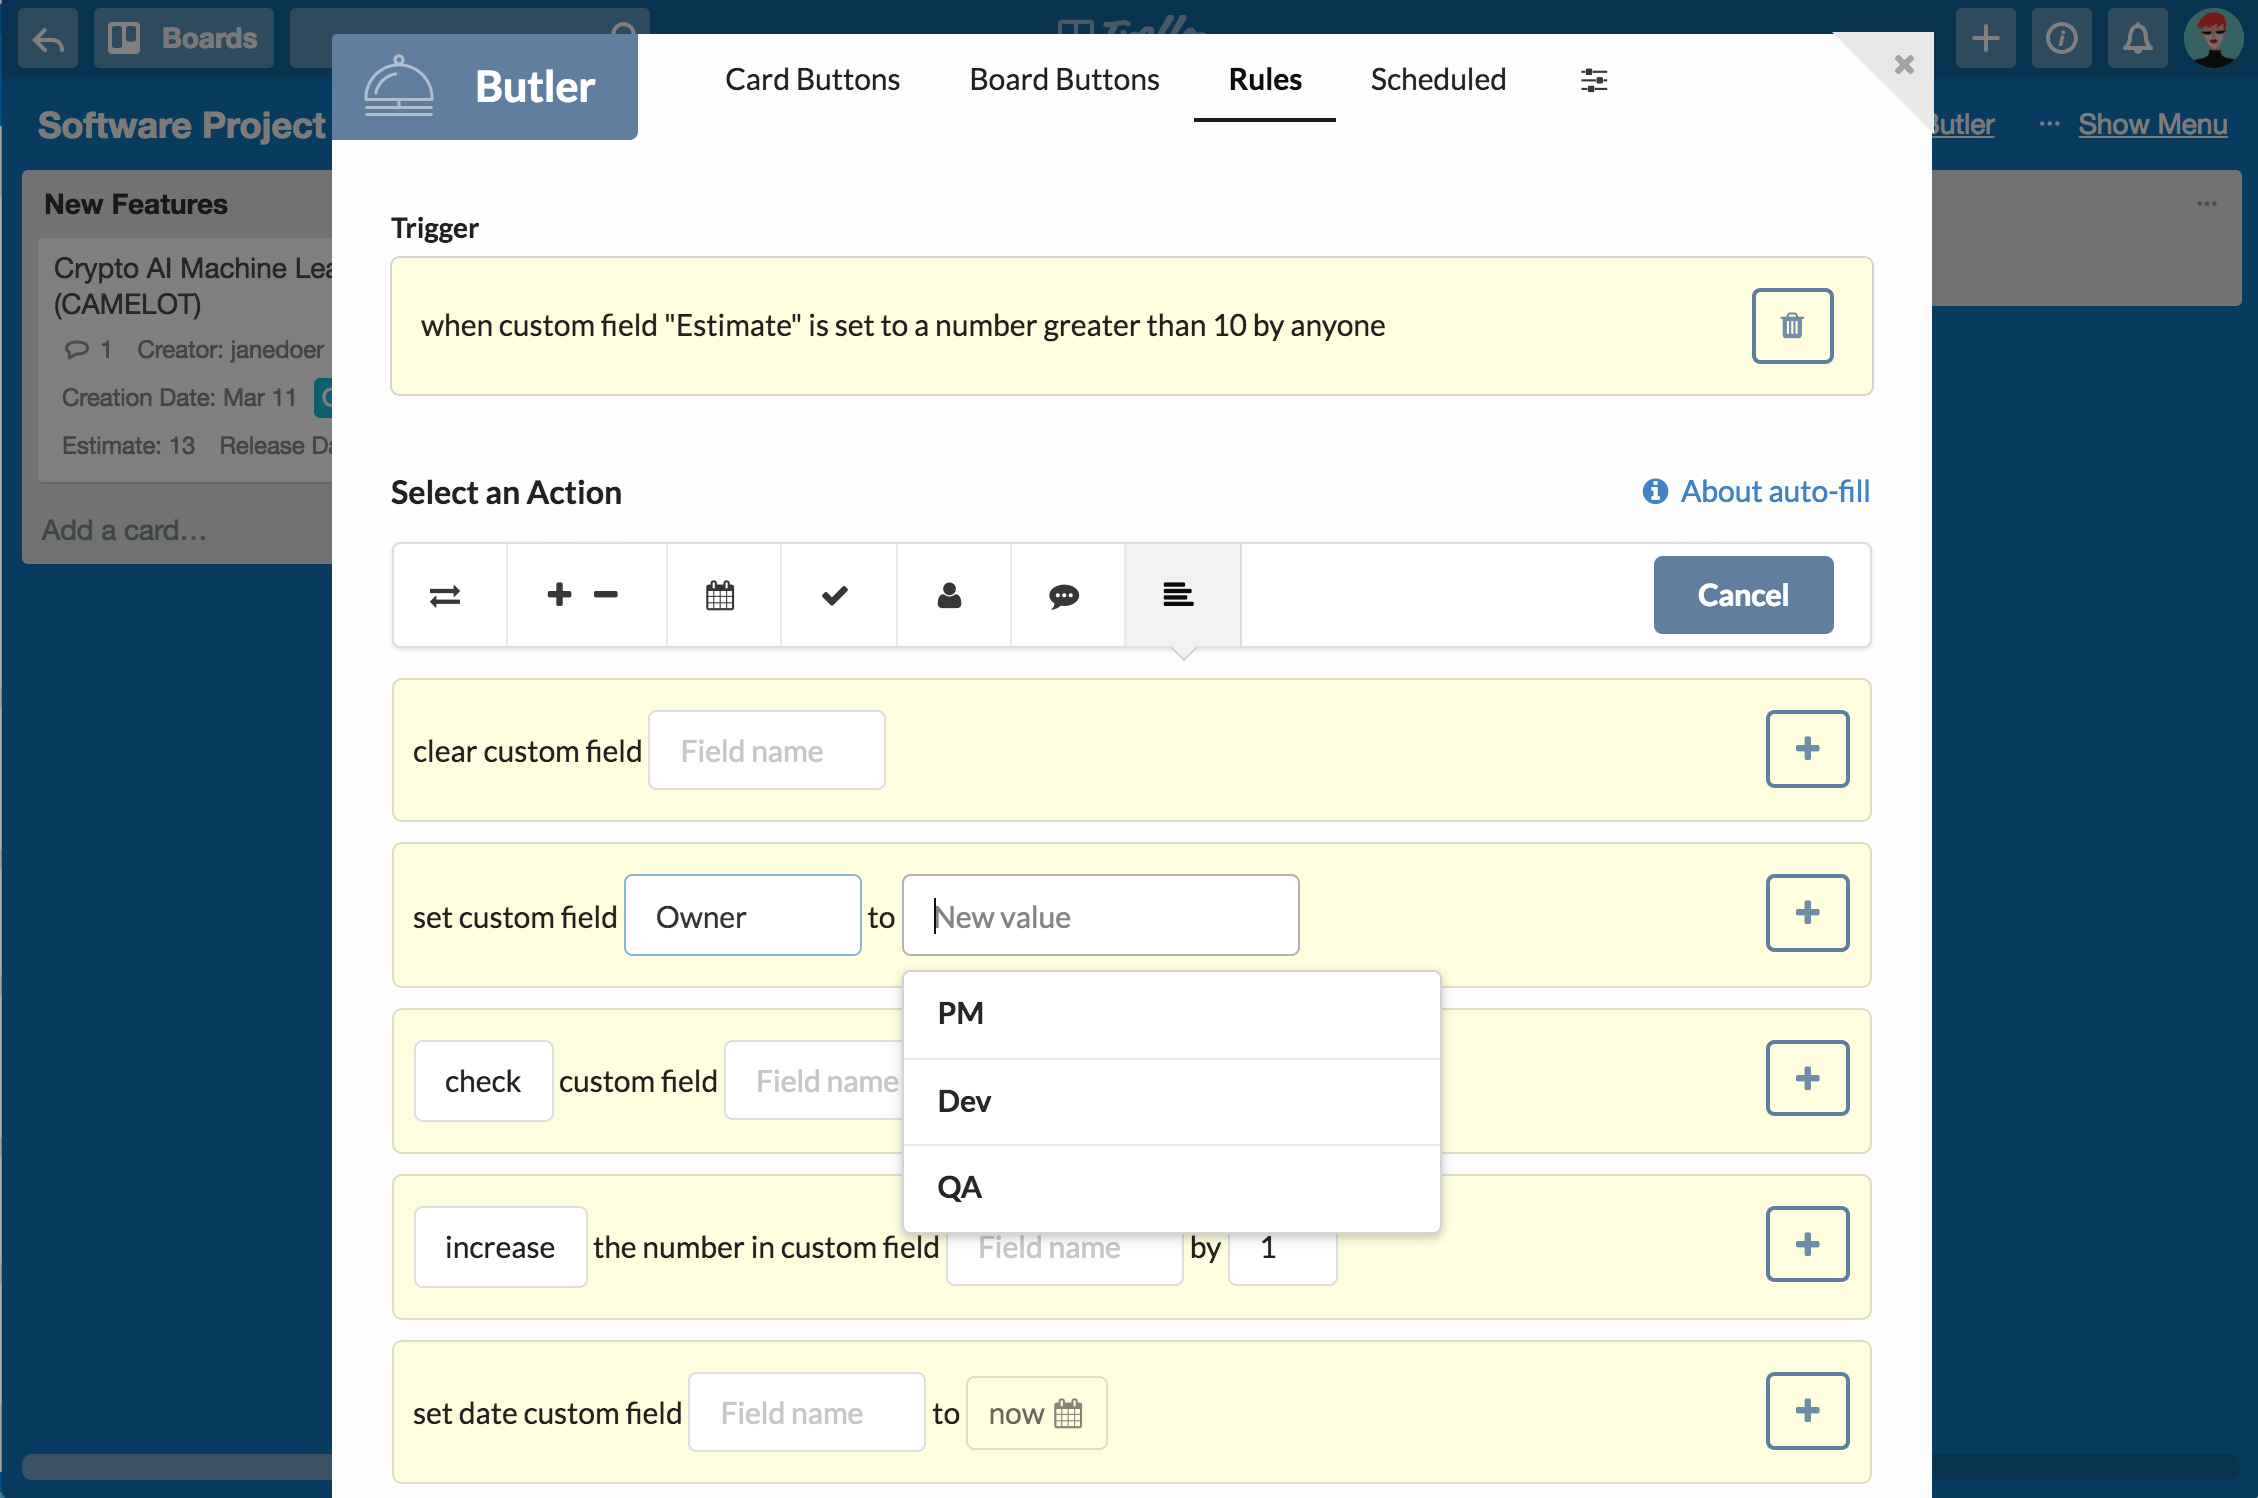 How to use Butler with Custom Fields in Trello